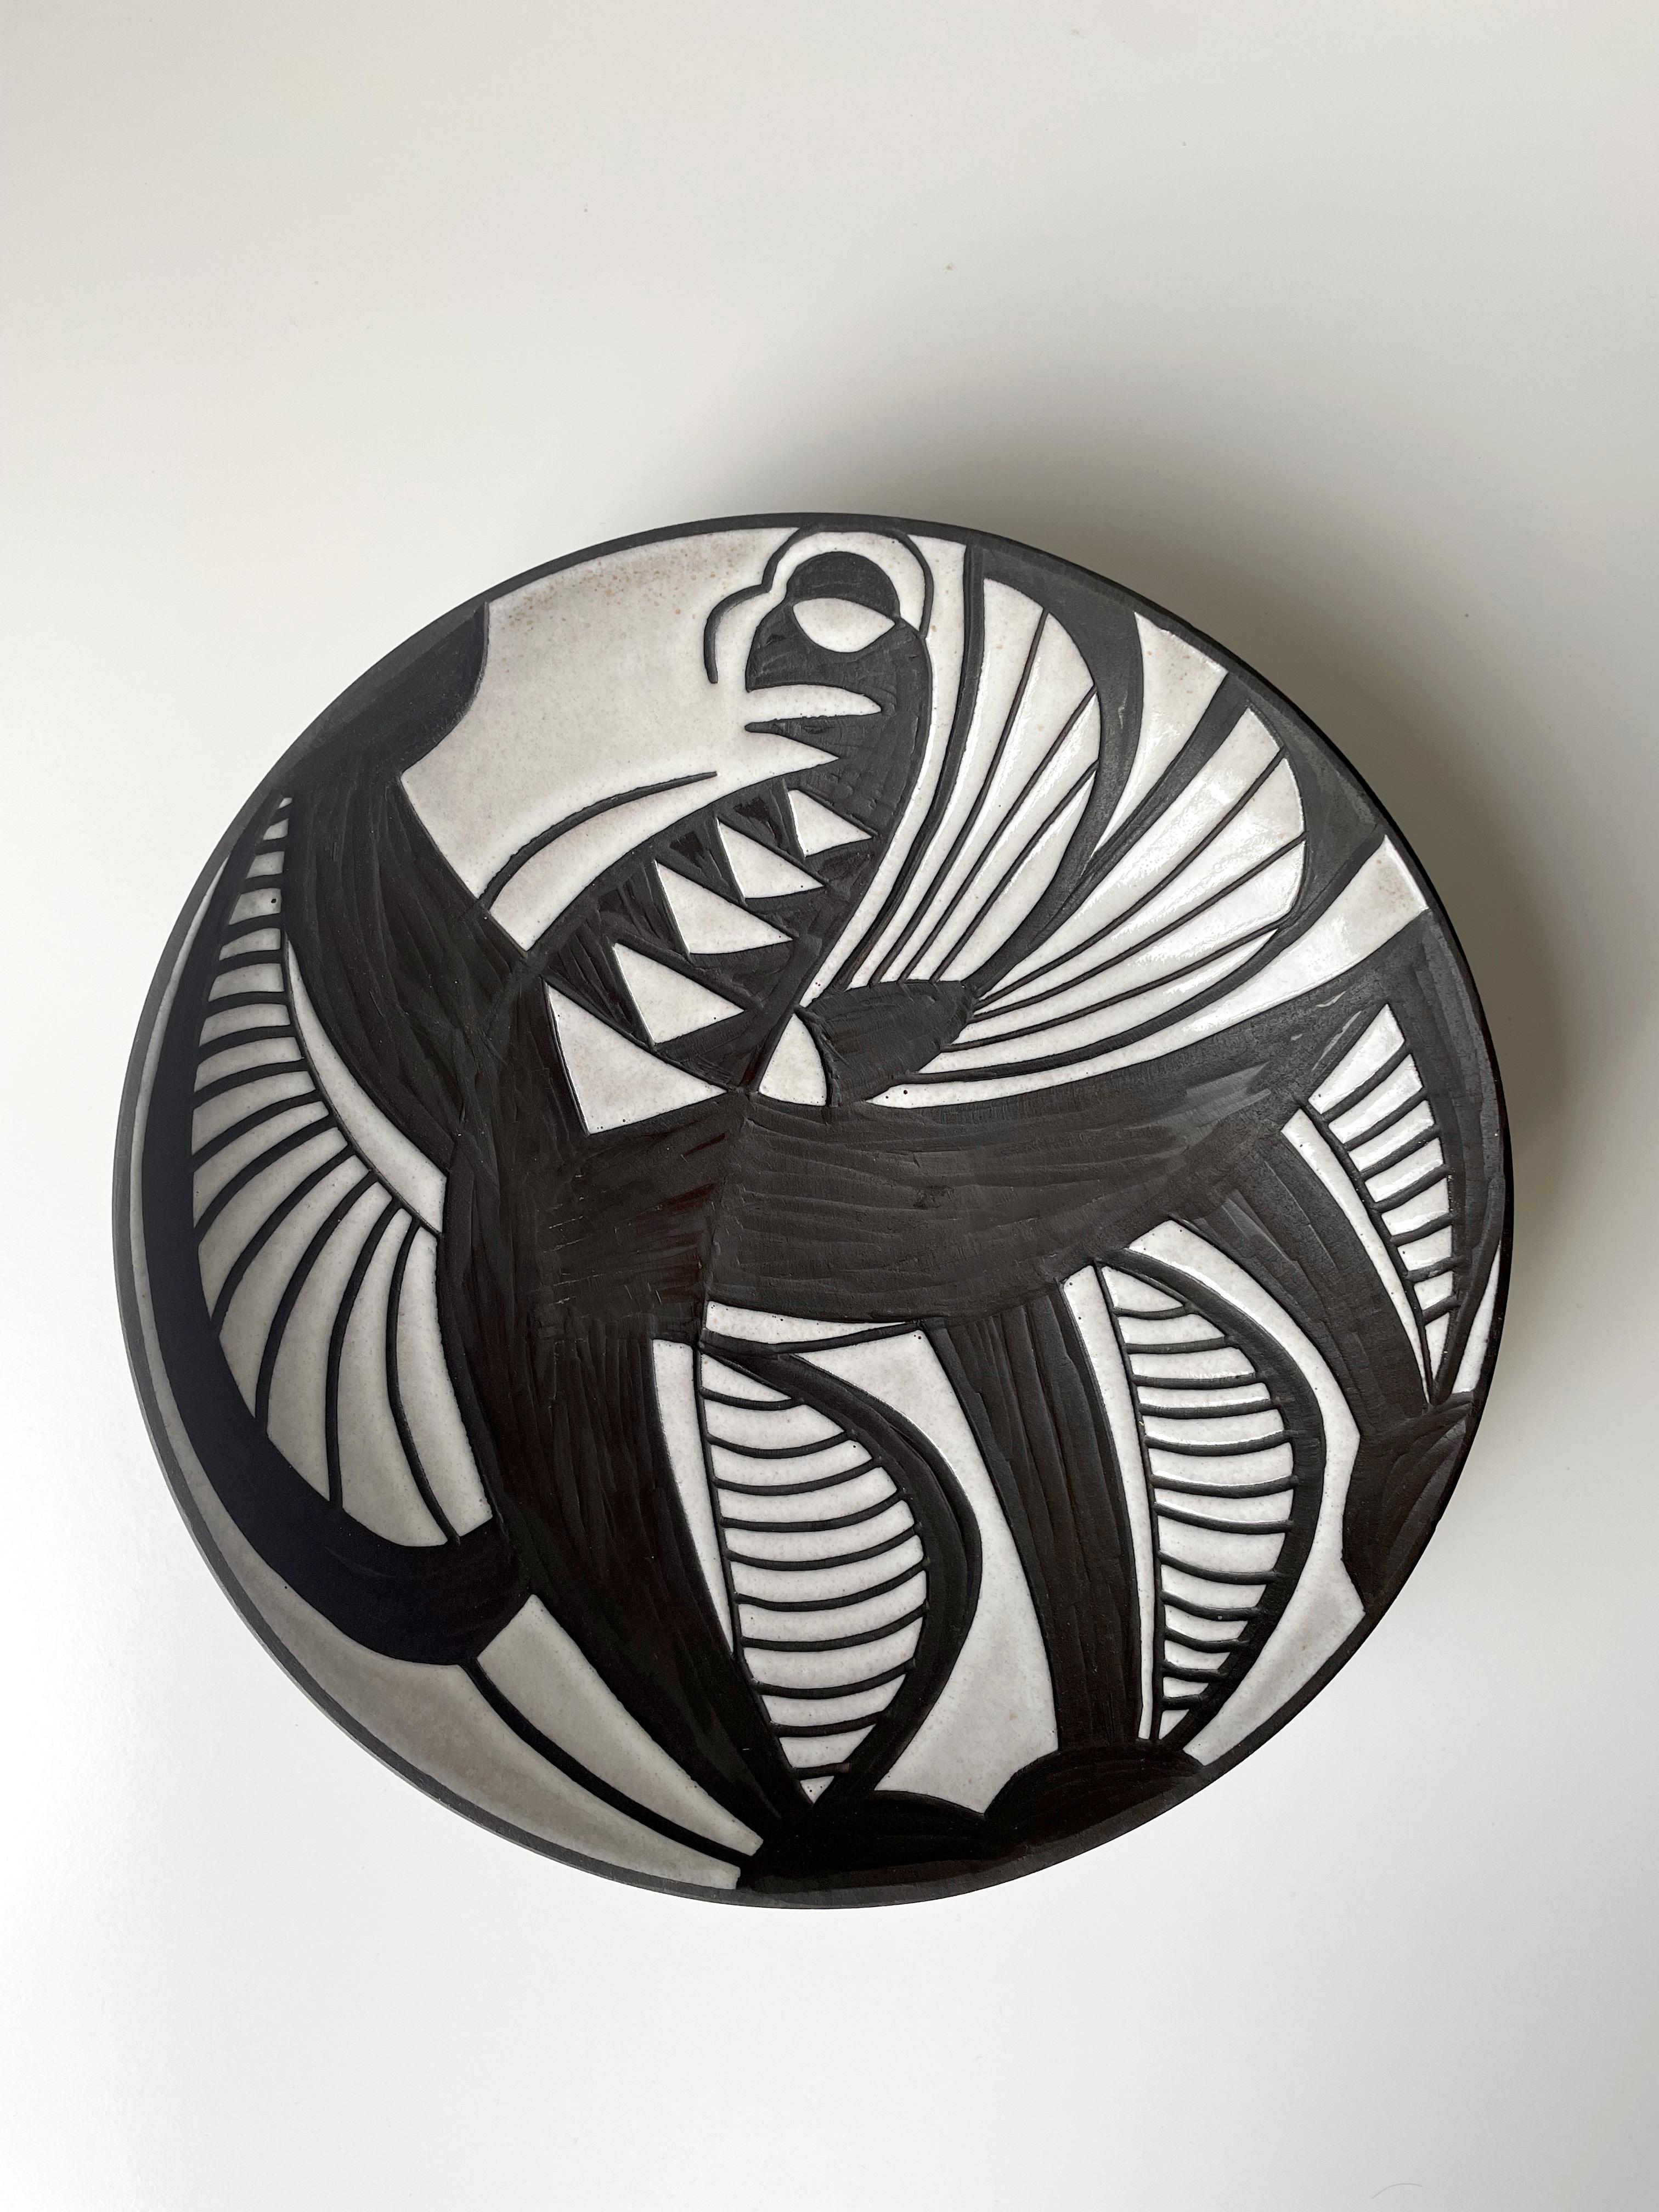 Danish modernist decorative plate / wall decoration / centerpiece with strong graphic decor from the Tribal Harlekin series by ceramic artist Marianne Starck (1931-2007). Shiny bone white glaze with hand-carved sgraffito graphic lines and patterns